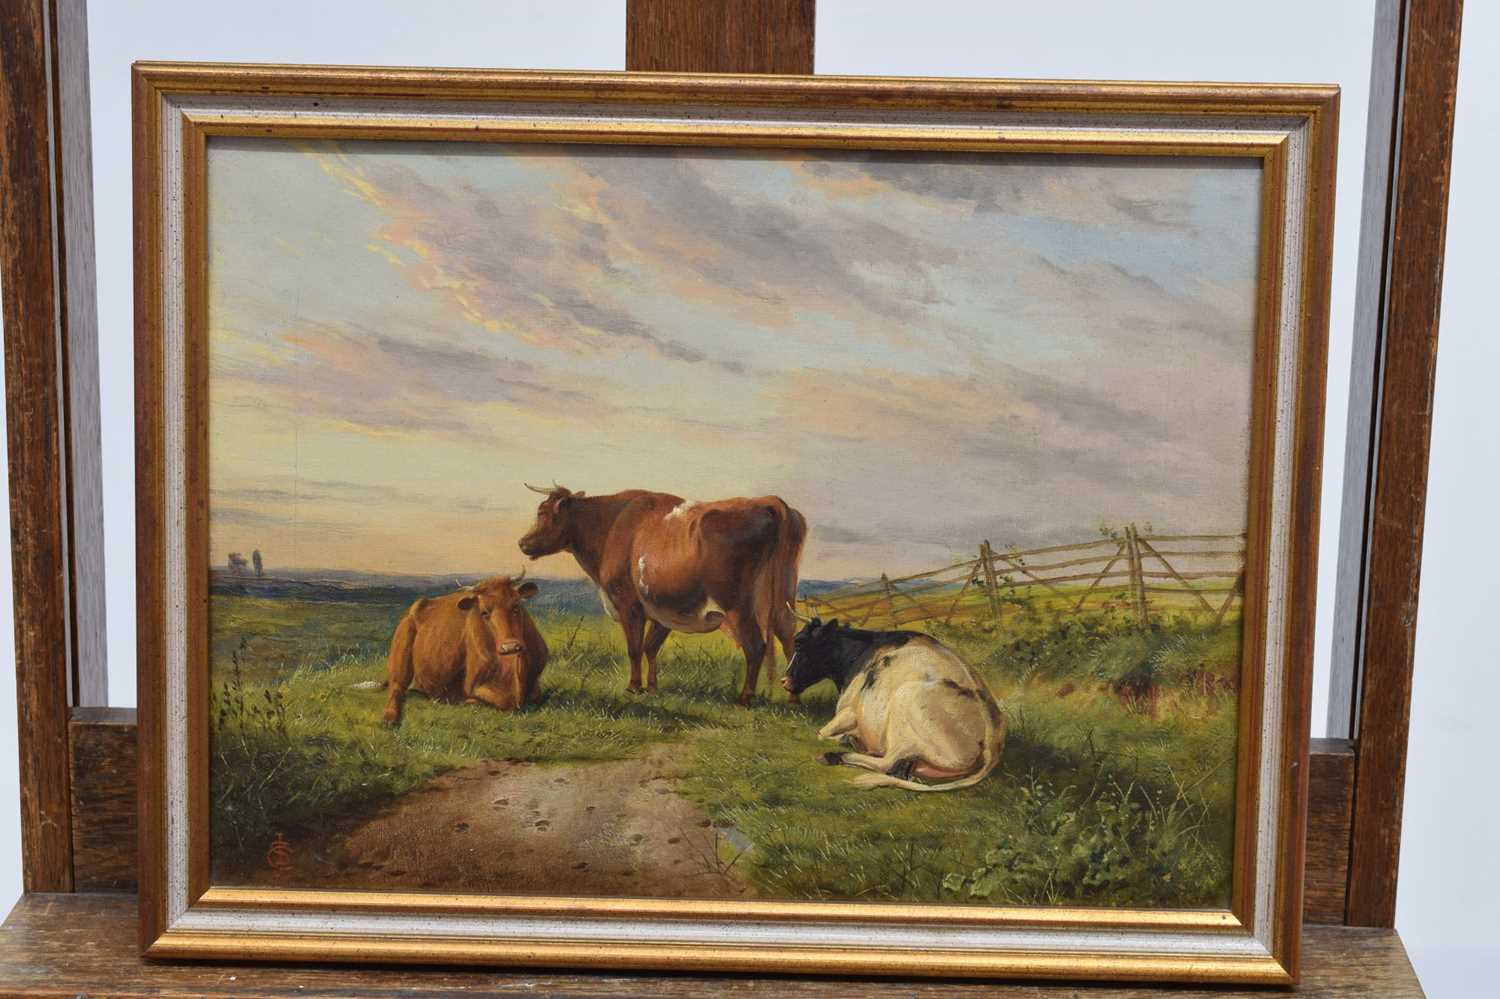 Manner of Thomas Sidney Cooper (1803-1902) - Oil on canvas - Cattle in landscape - Image 2 of 14